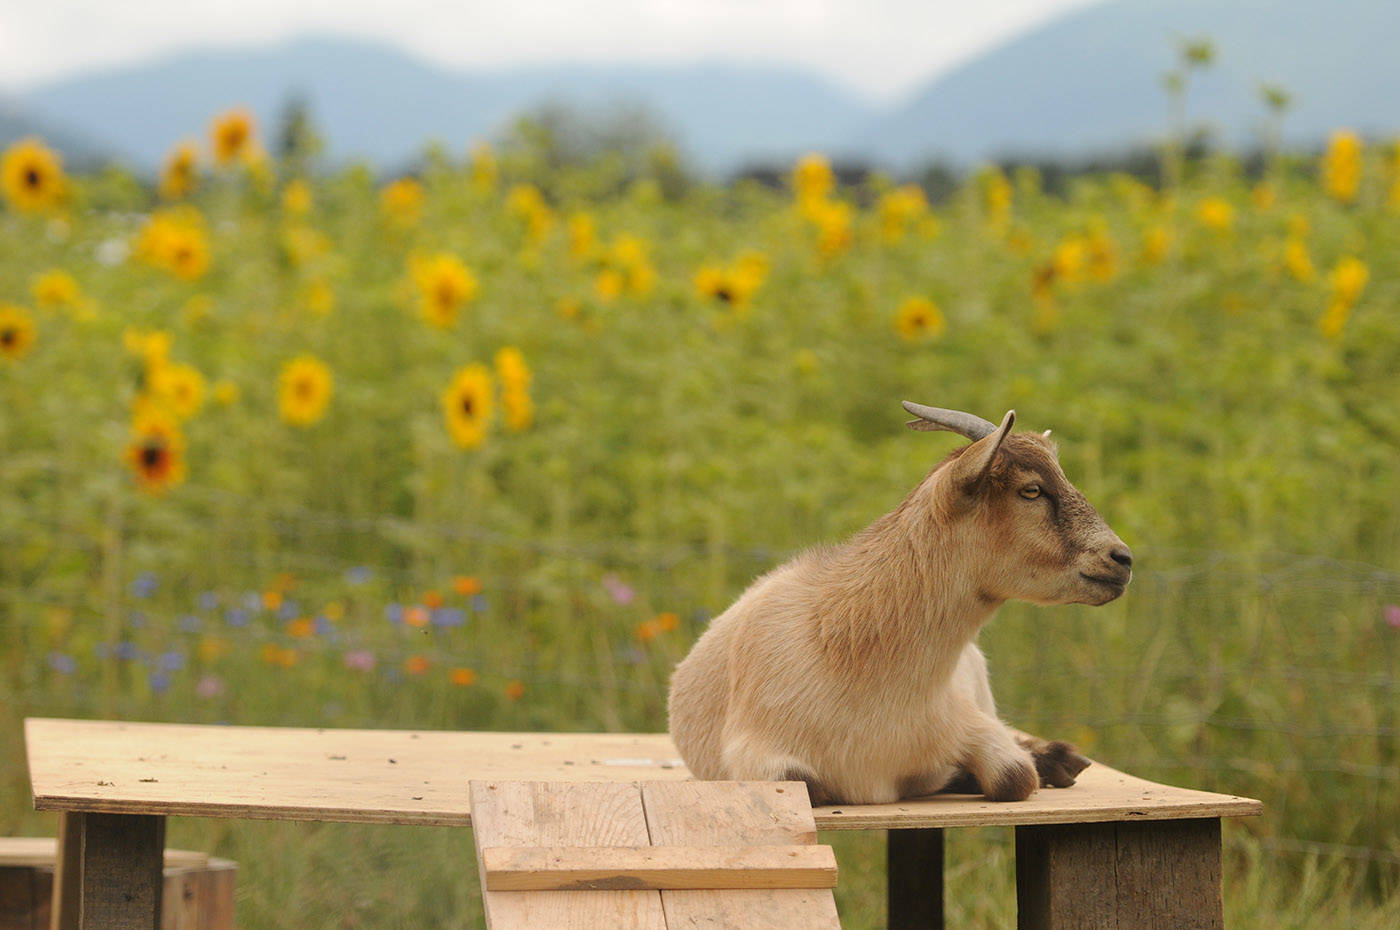 Goats (one seen here on Saturday, July 17, 202) are one of the new attractions this year at the Cultus Lake Flower Fest. (Jenna Hauck/ Chilliwack Progress)